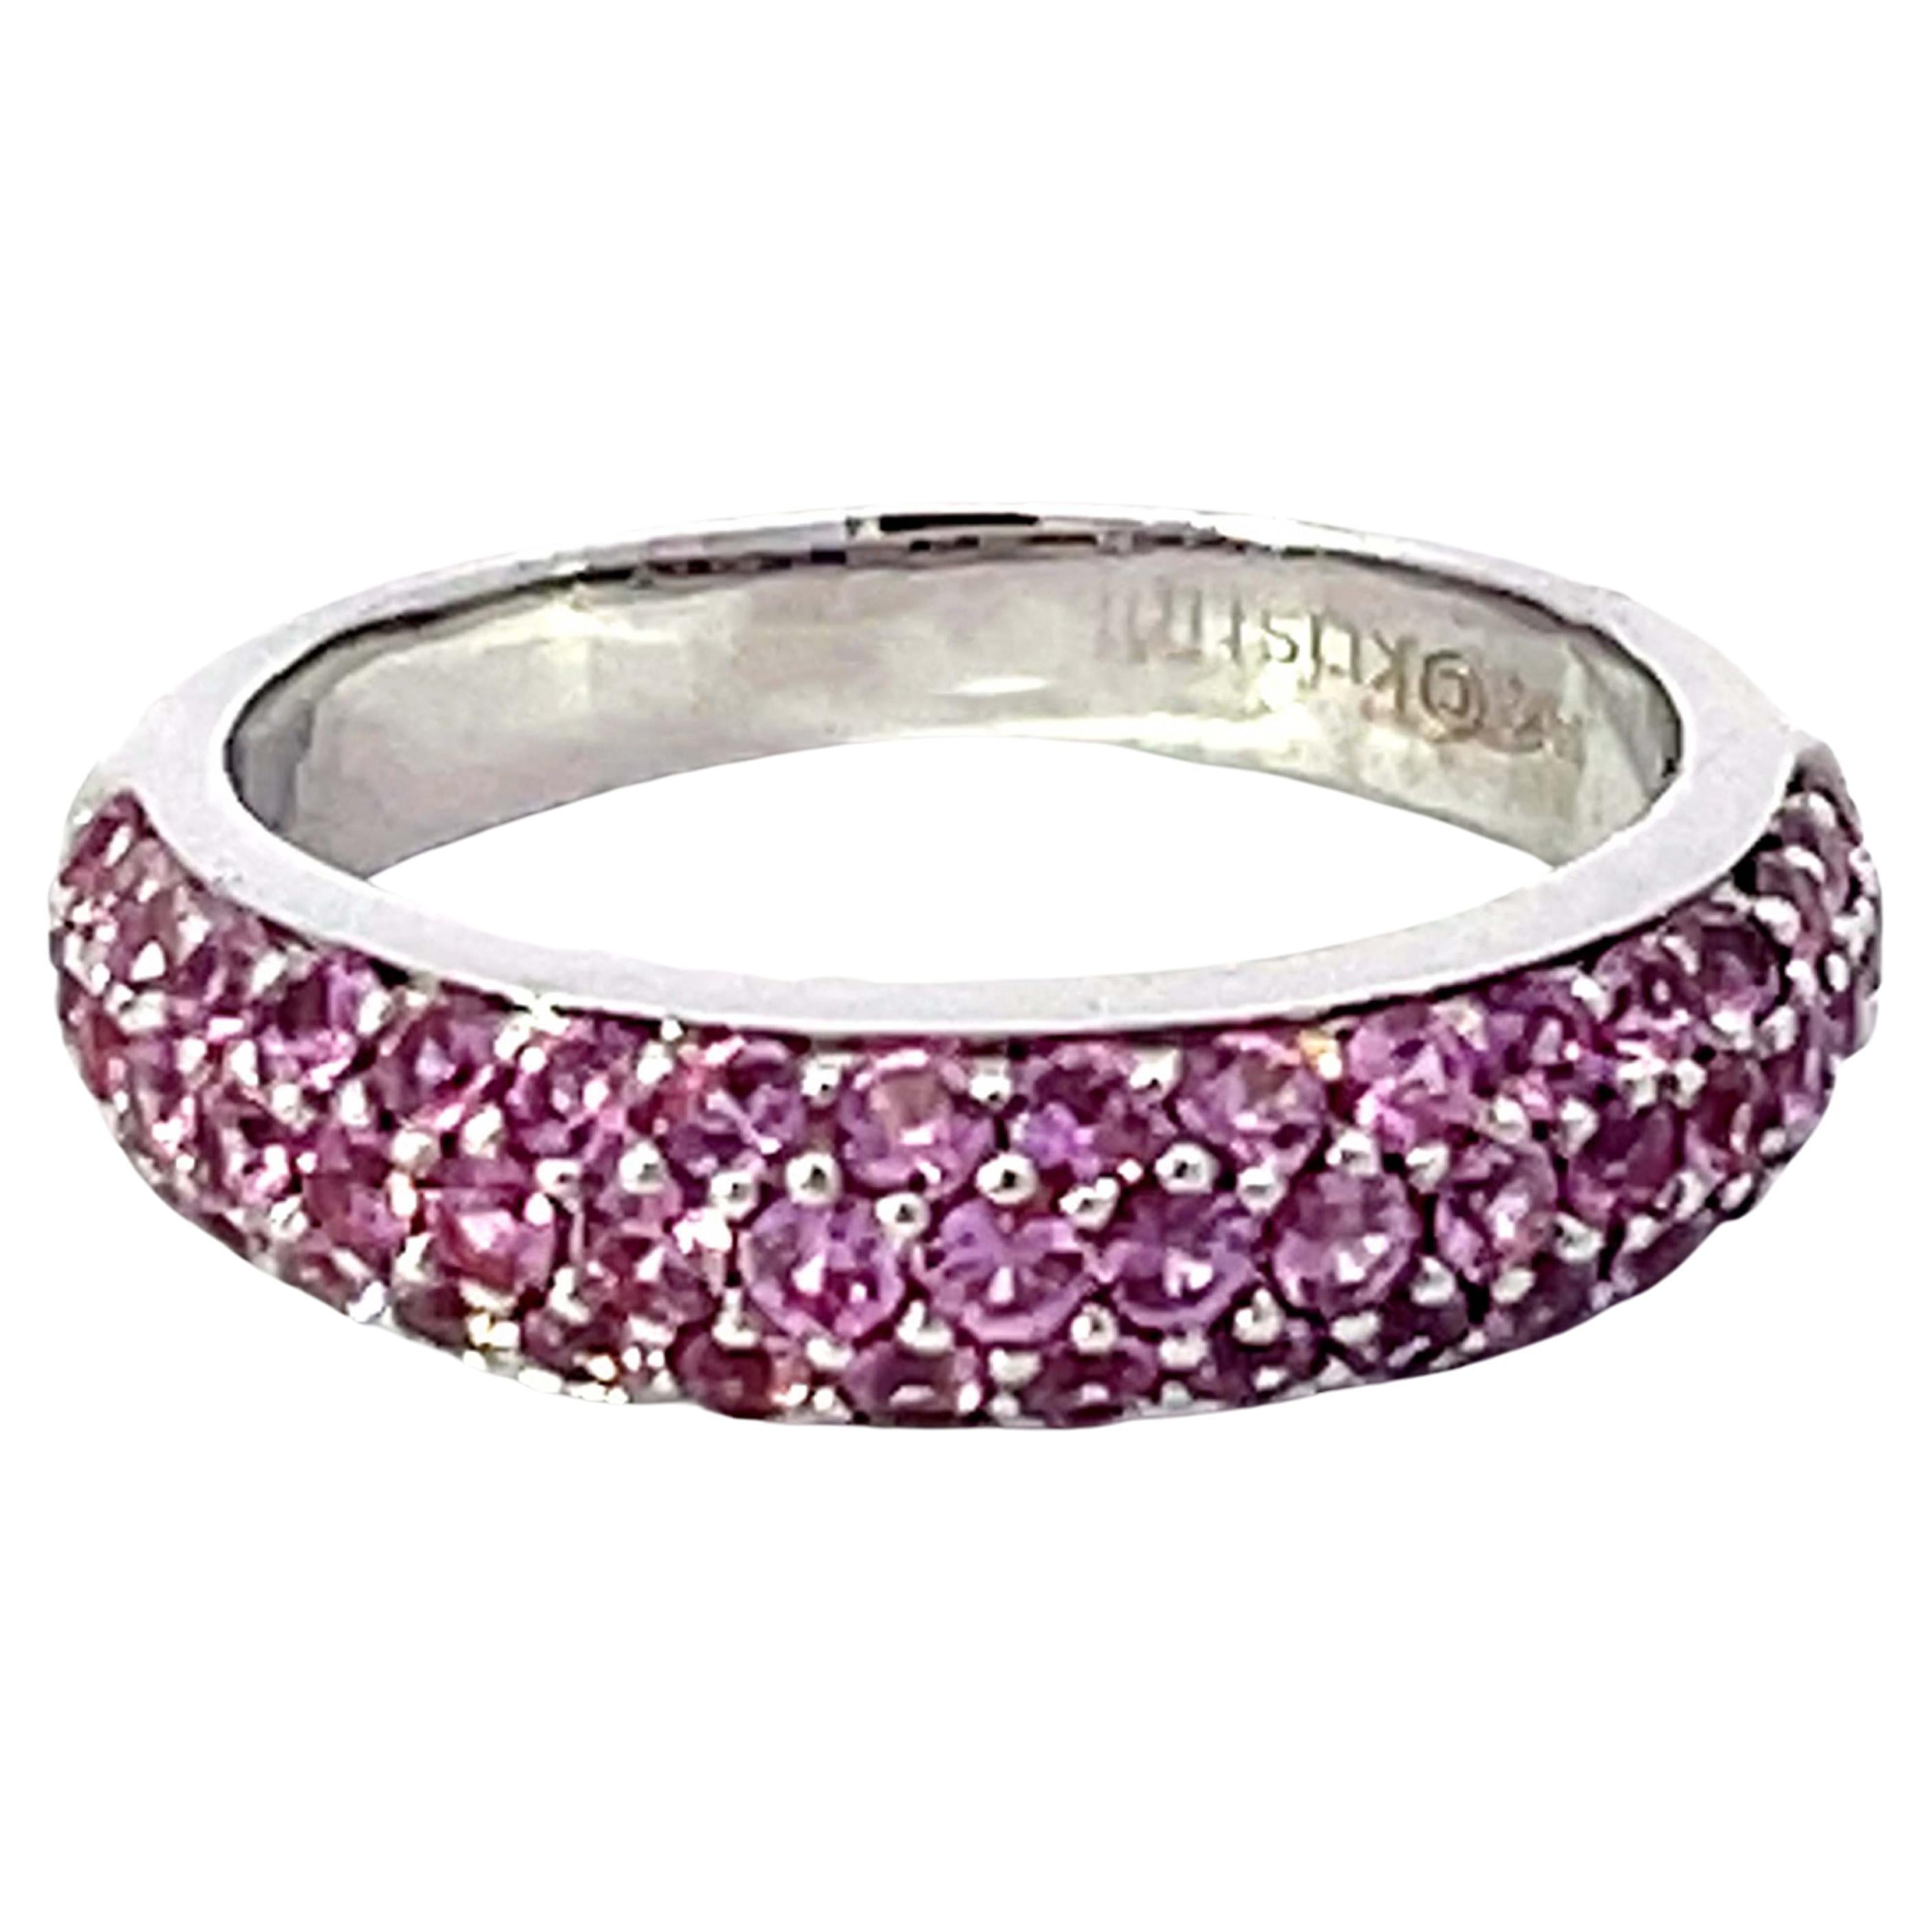 Pink Sapphire Dome Ring in 14K White Gold